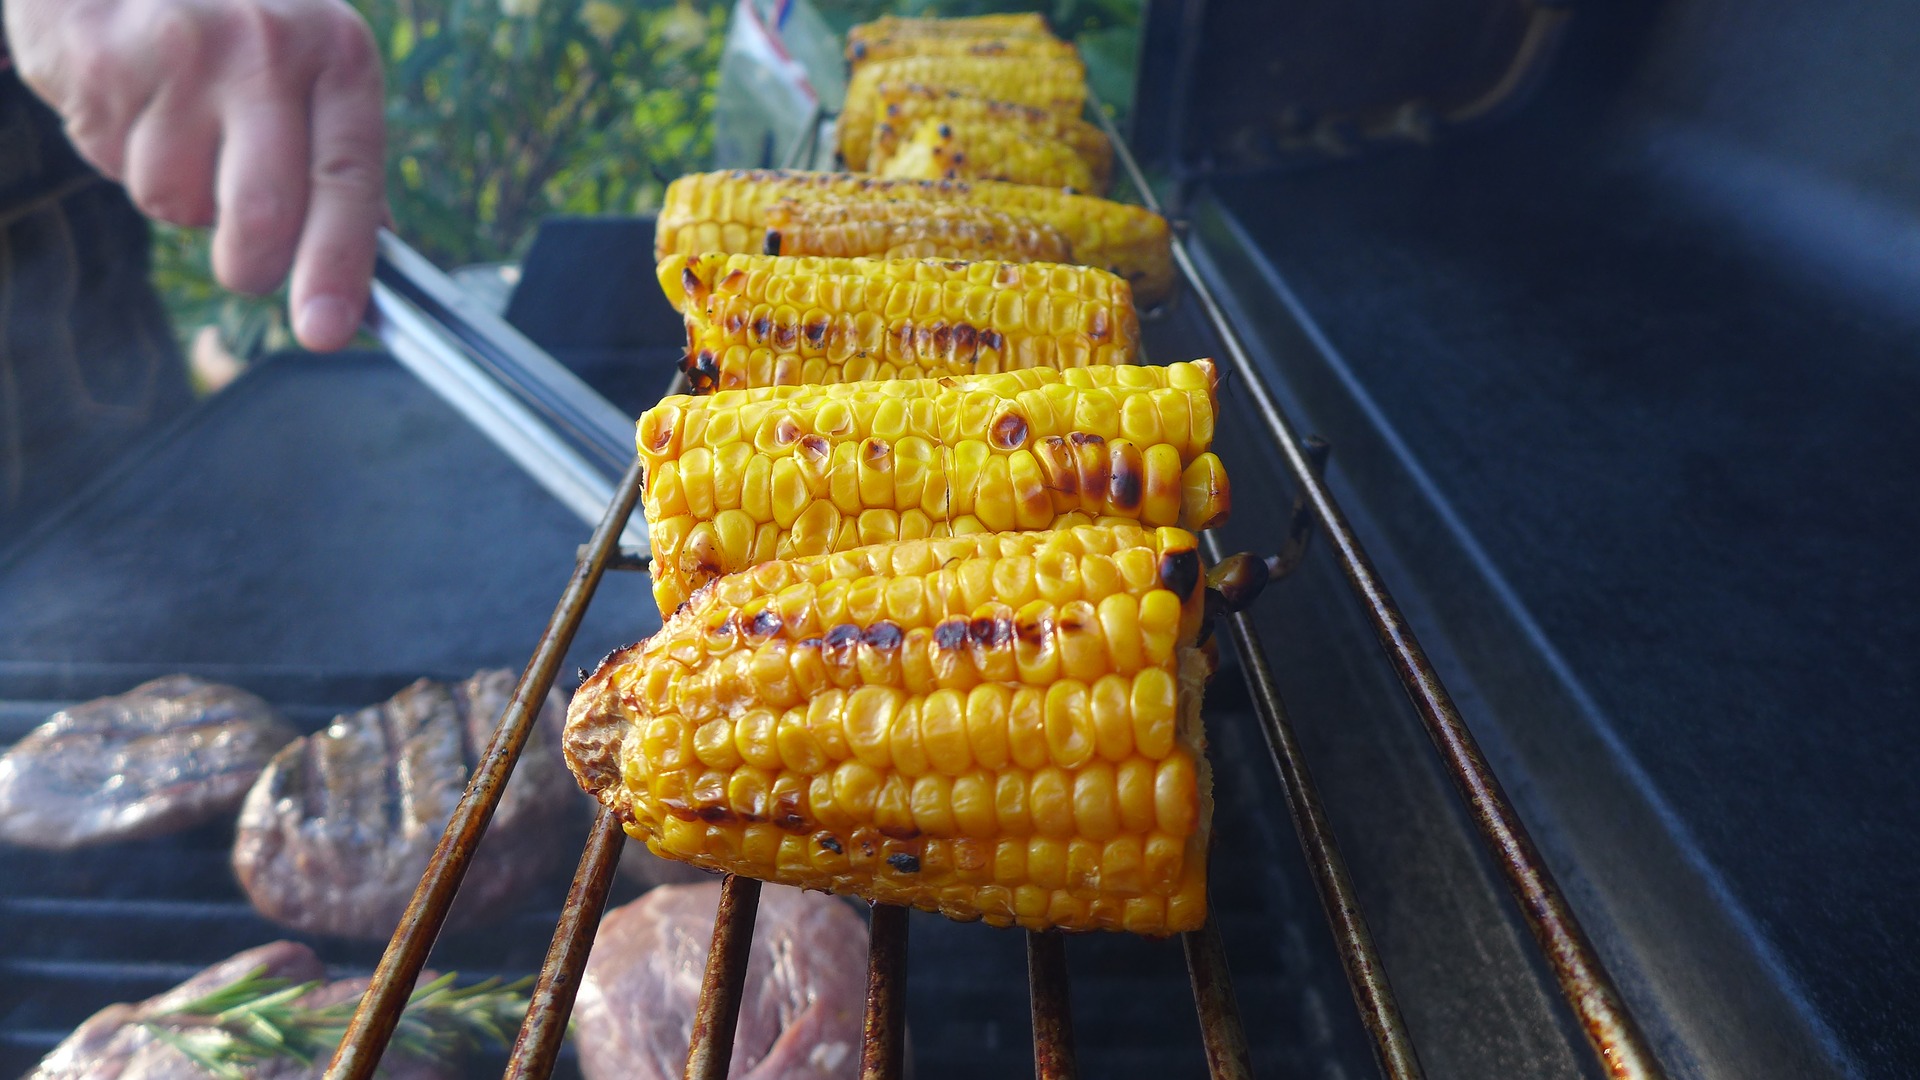 Corn on the cop is delicious and easy to prepare when camping